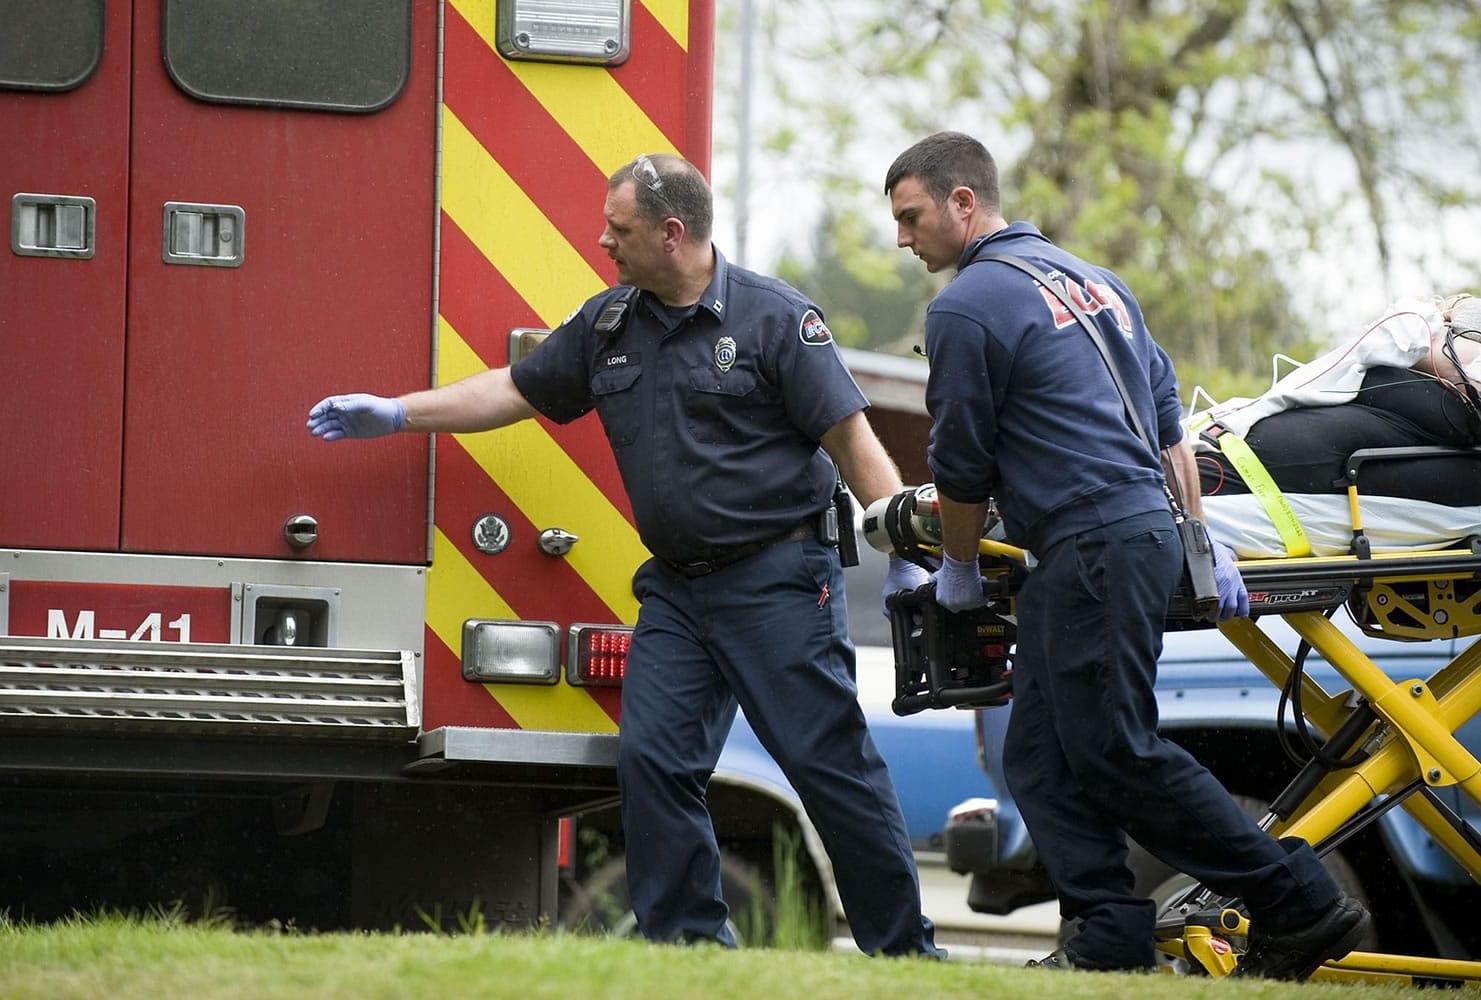 East County Fire and Rescue firefighters Capt. Wesley Long, left, and John Prasch transport a patient to a waiting ambulance.